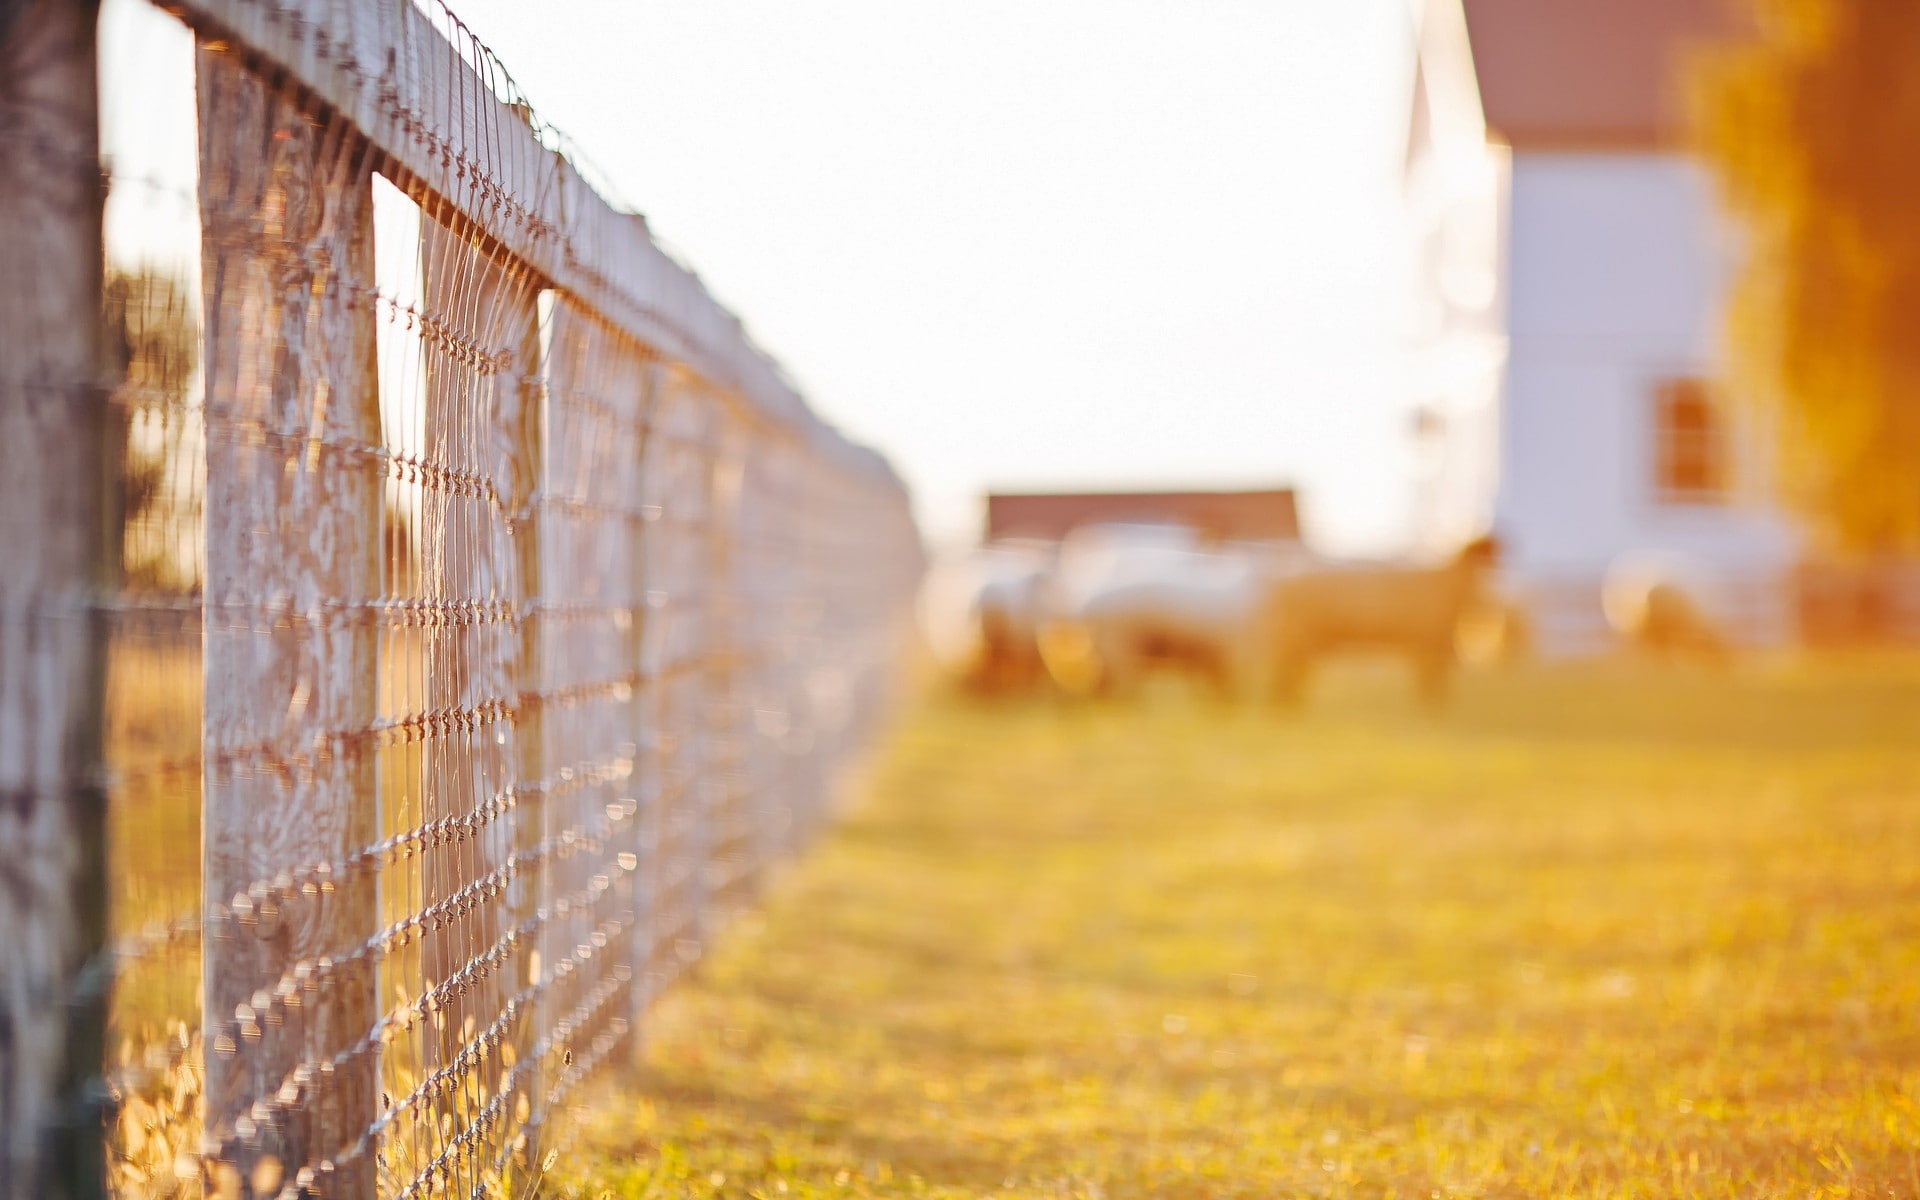 Tence, Sun Day, Macro, fence, fencing, Nature, grass, trees, leaves